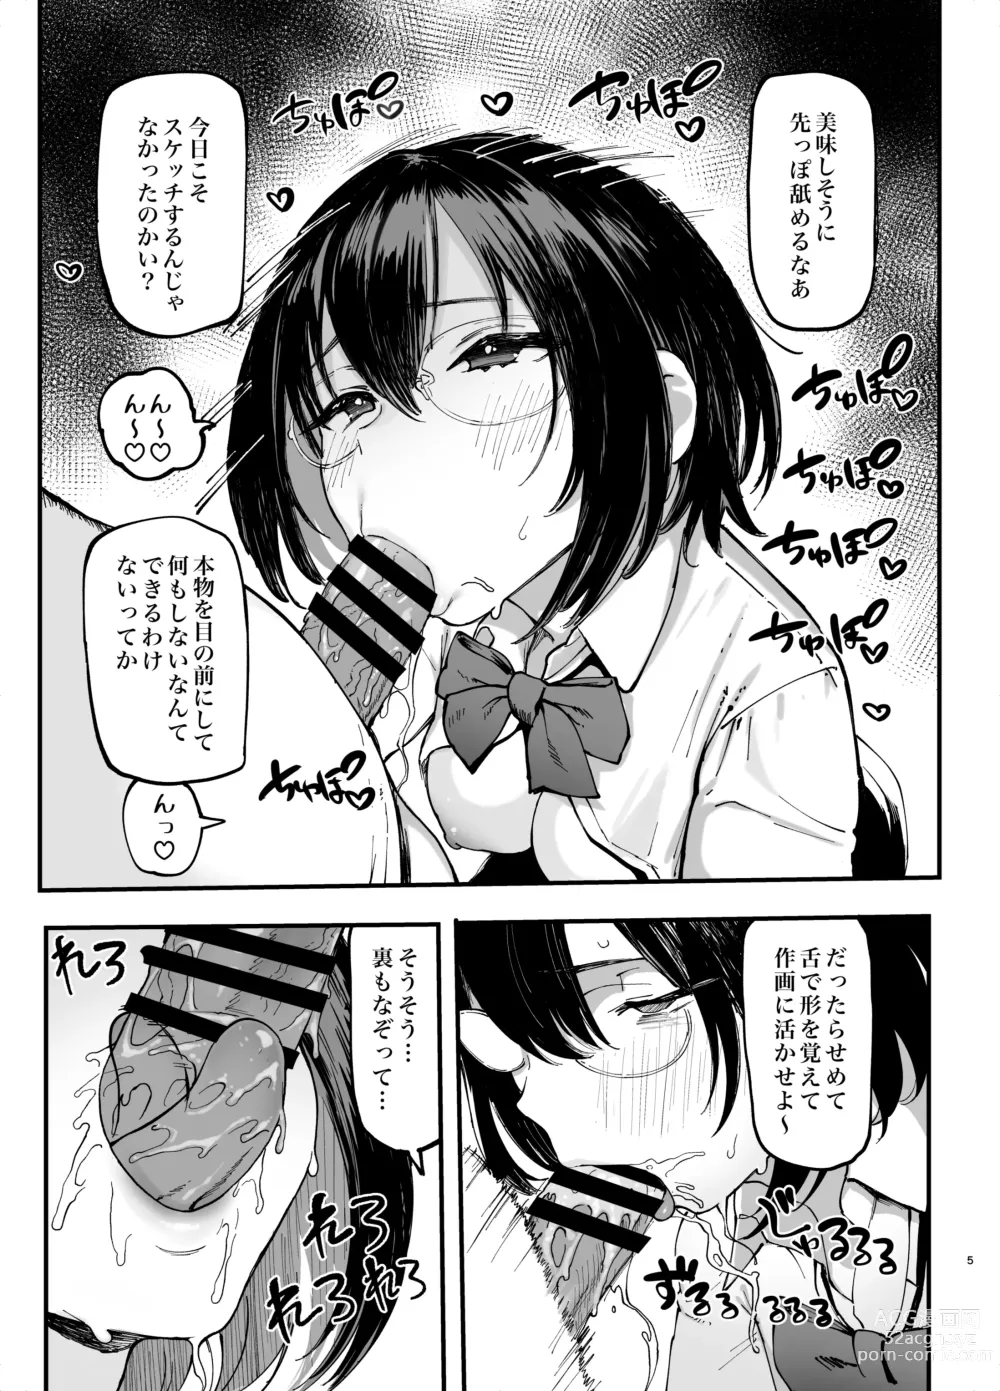 Page 5 of doujinshi OeAe